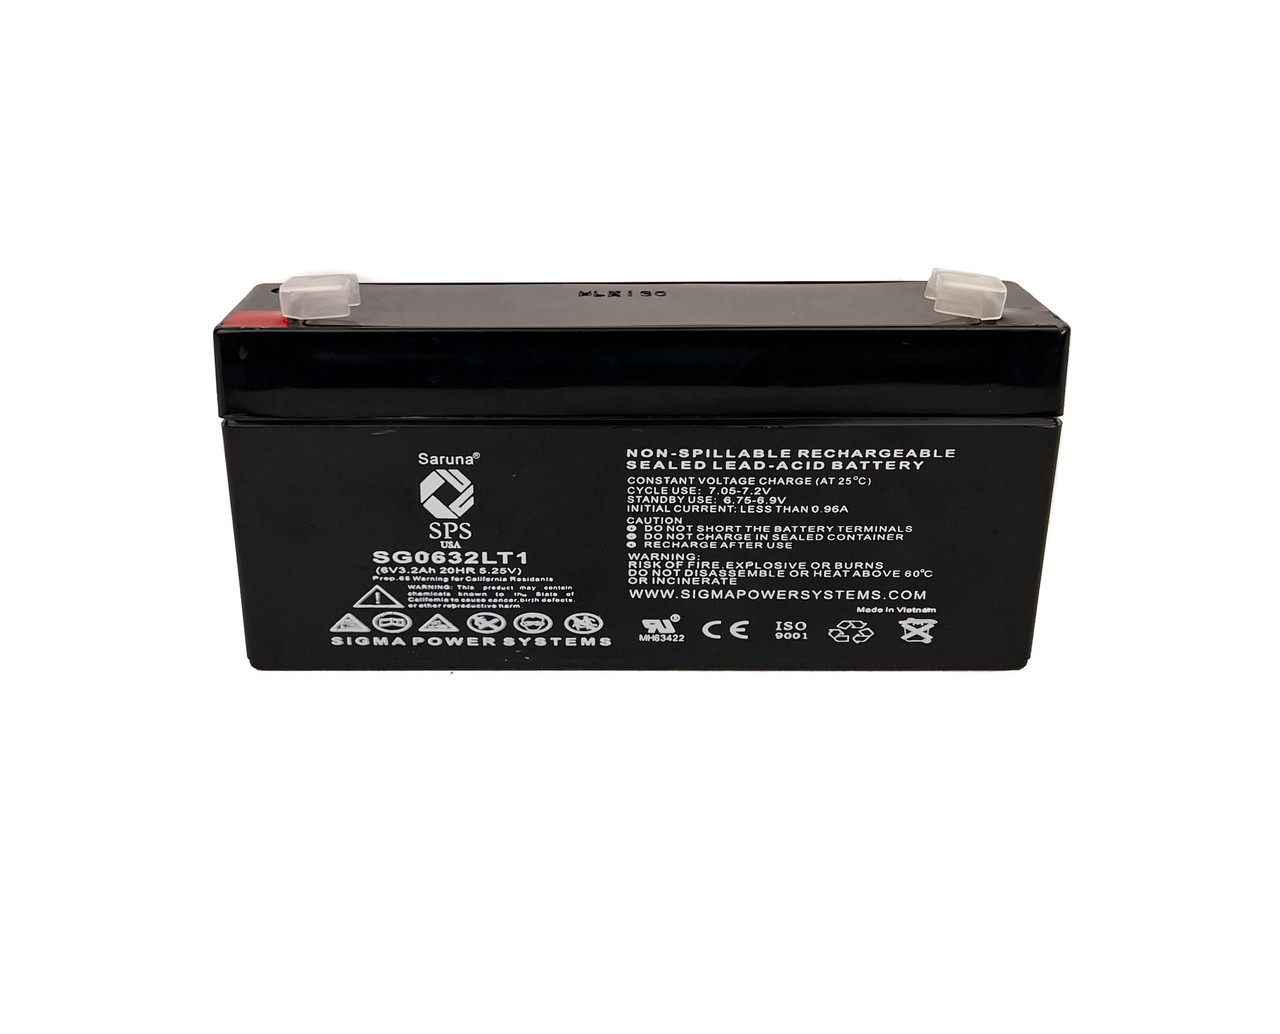 Raion Power RG0632LT1 6V 3.2Ah Compatible Replacement Battery for Alaris Medical Keofeed 3080 Infusion Pump